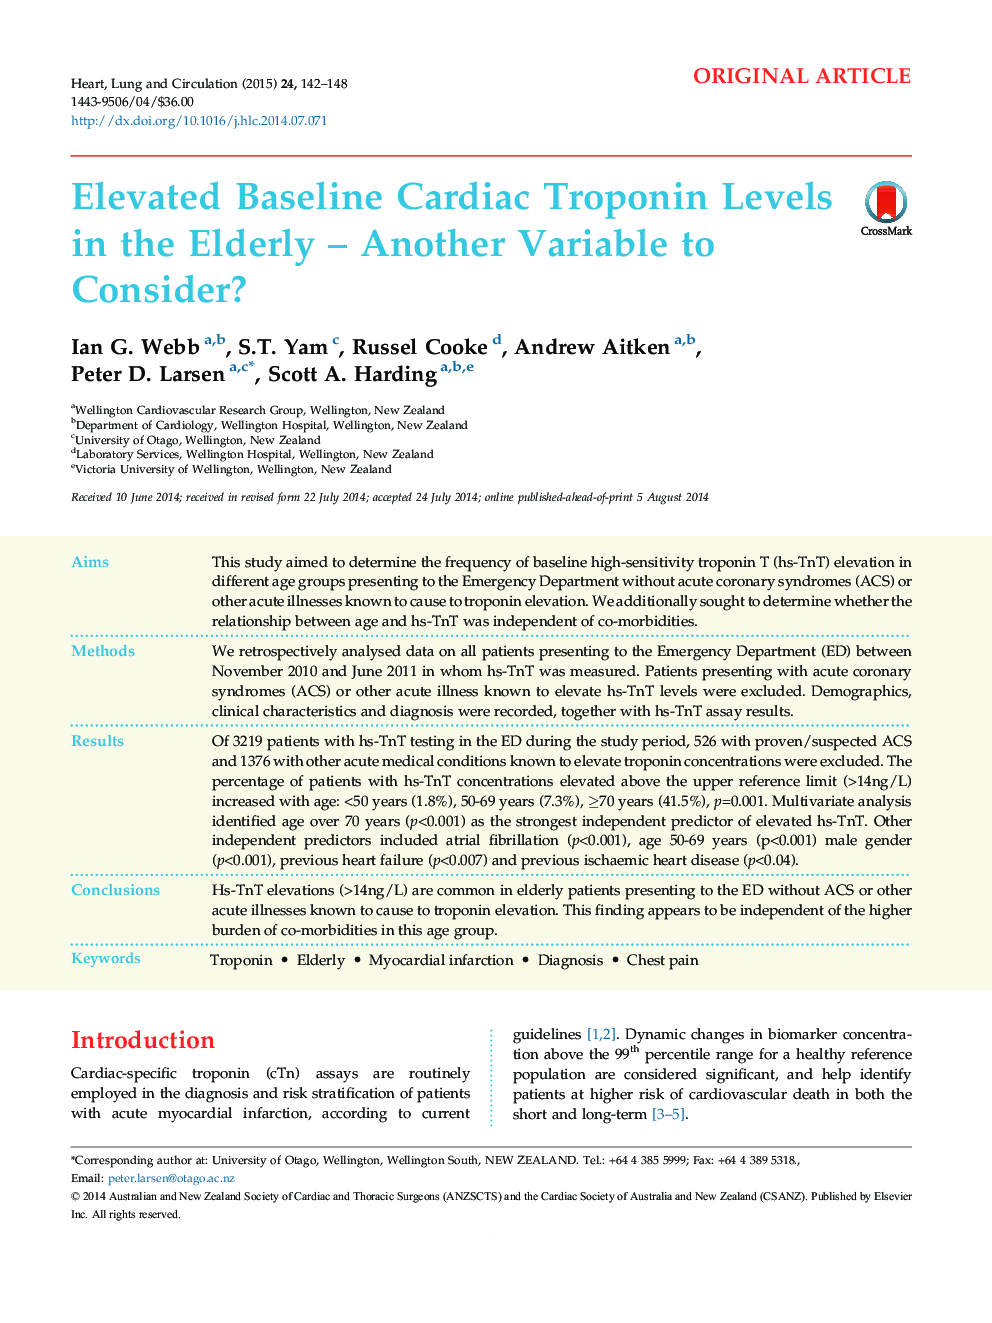 Elevated Baseline Cardiac Troponin Levels in the Elderly – Another Variable to Consider?